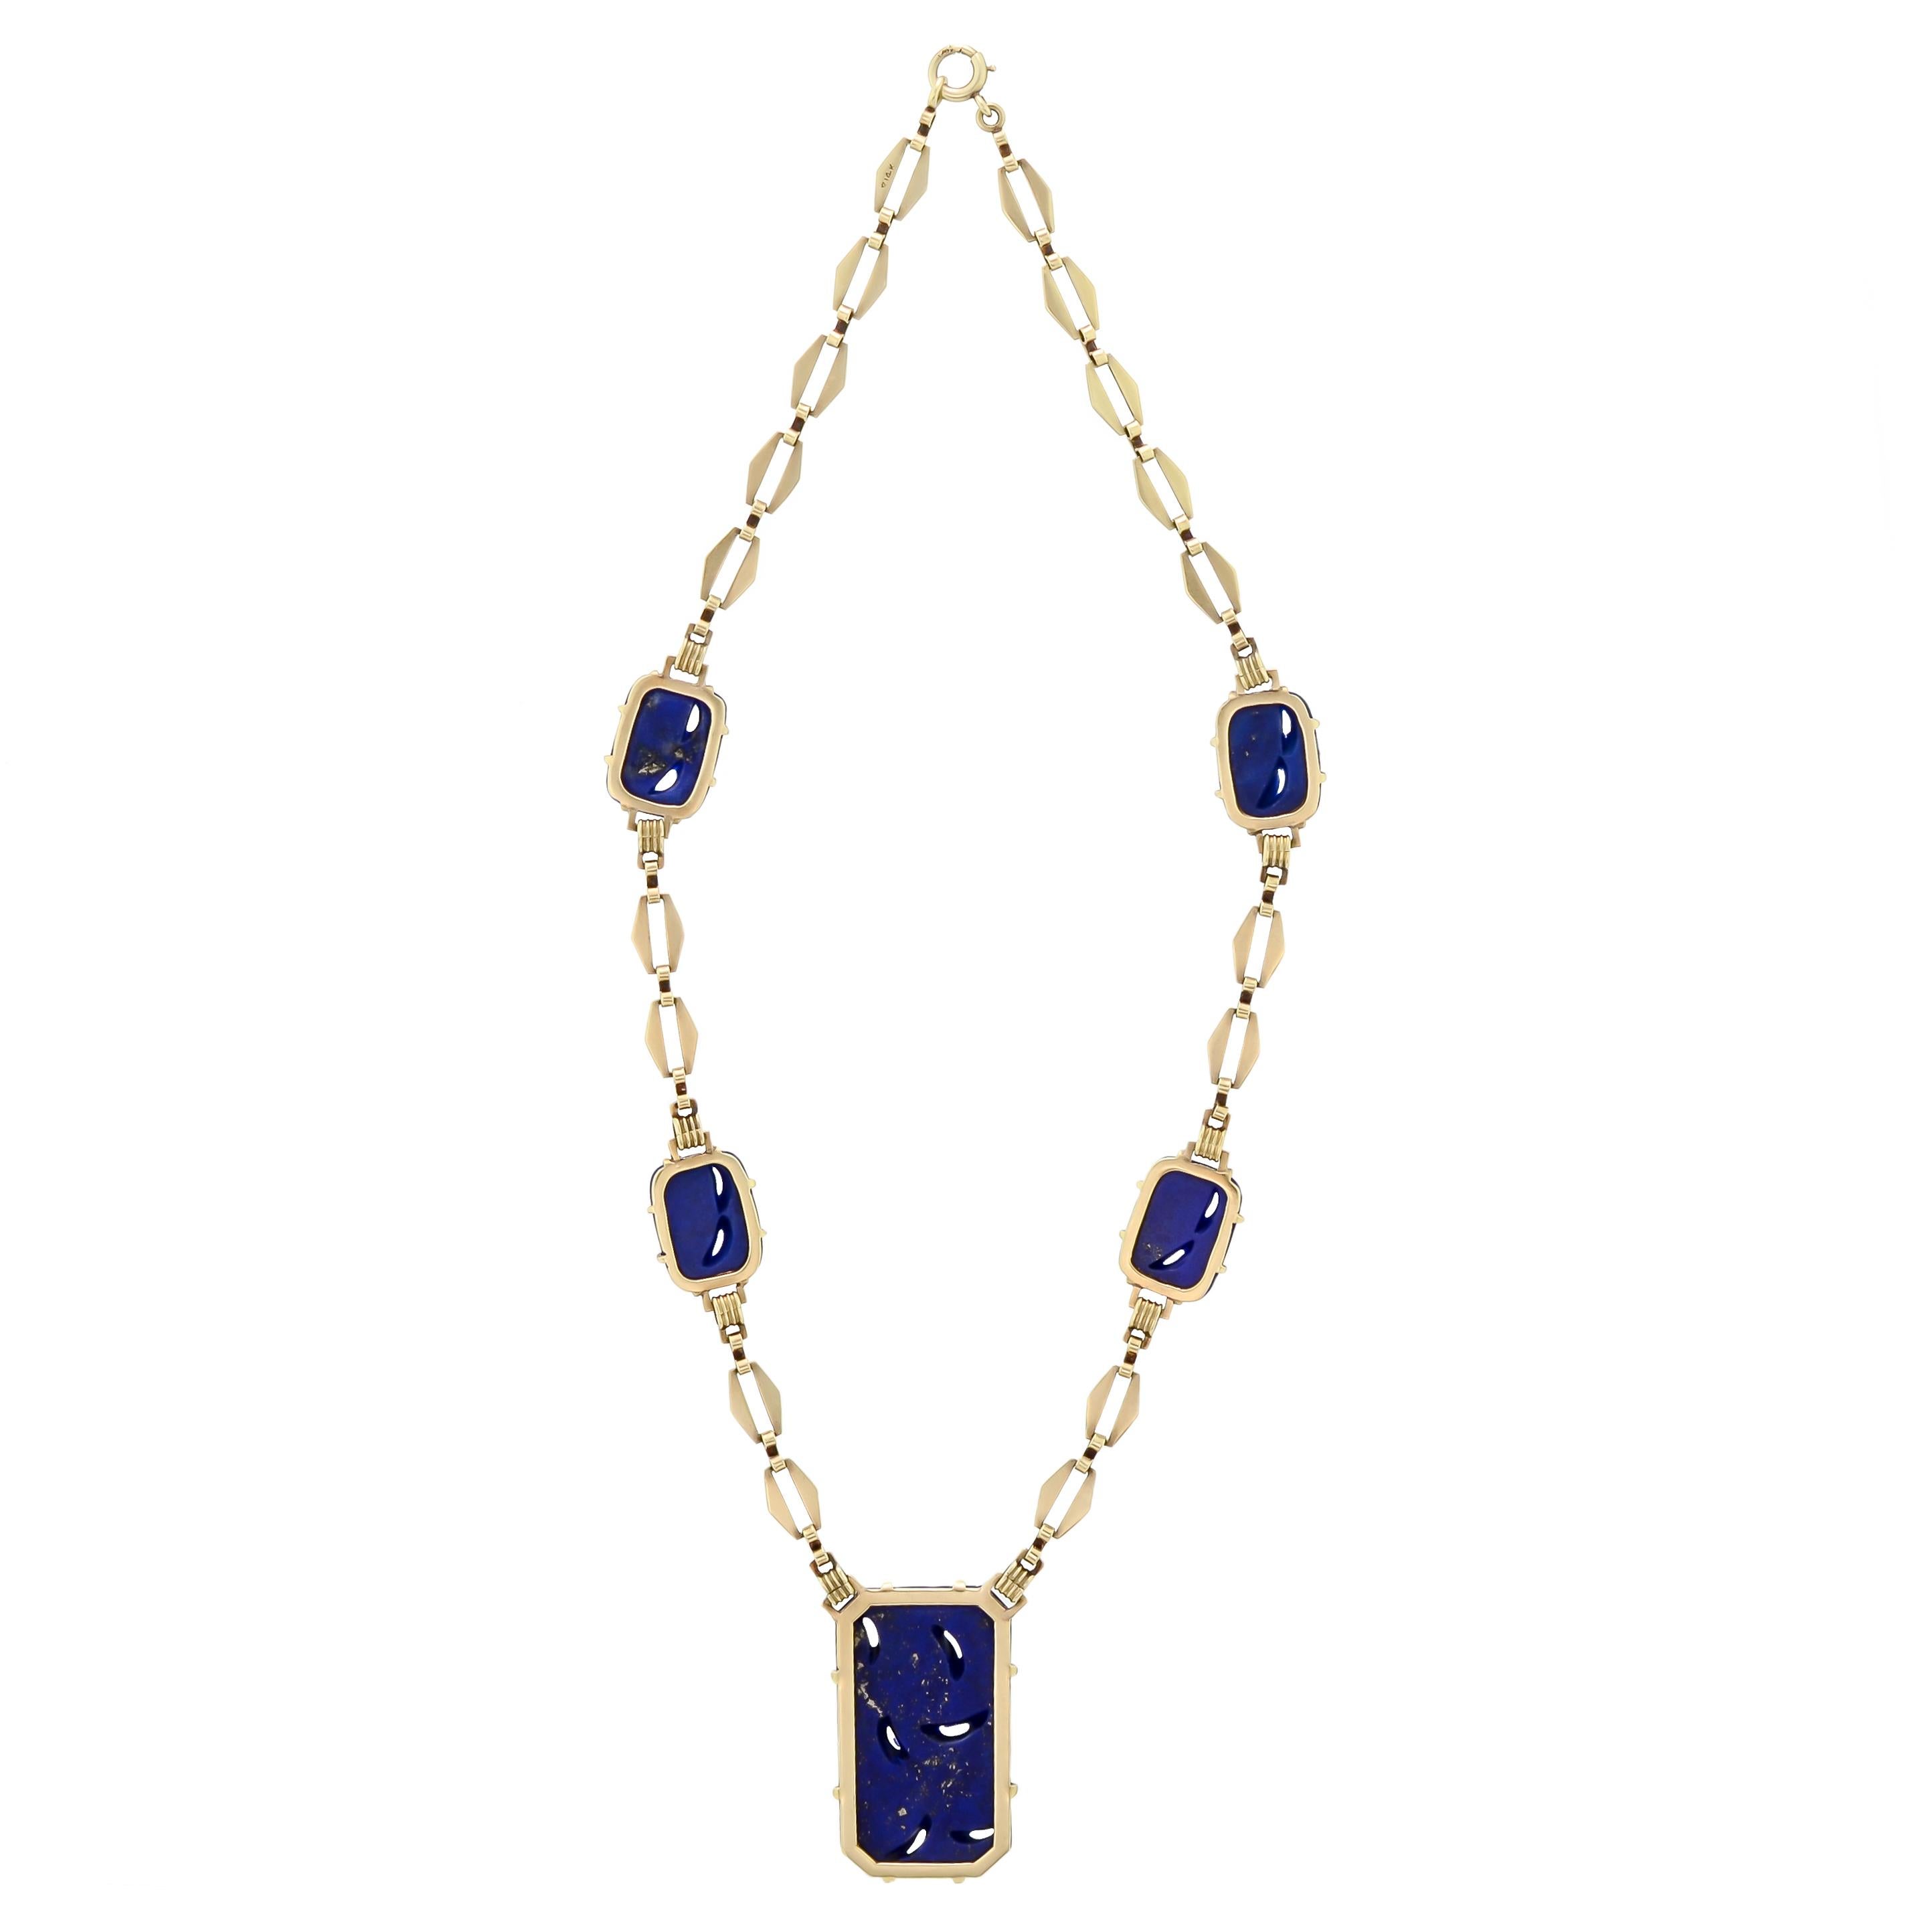 Alluring Art Deco Carved Lapis, Blue Enamel and 14 Karat Yellow Gold Necklace For Sale 1